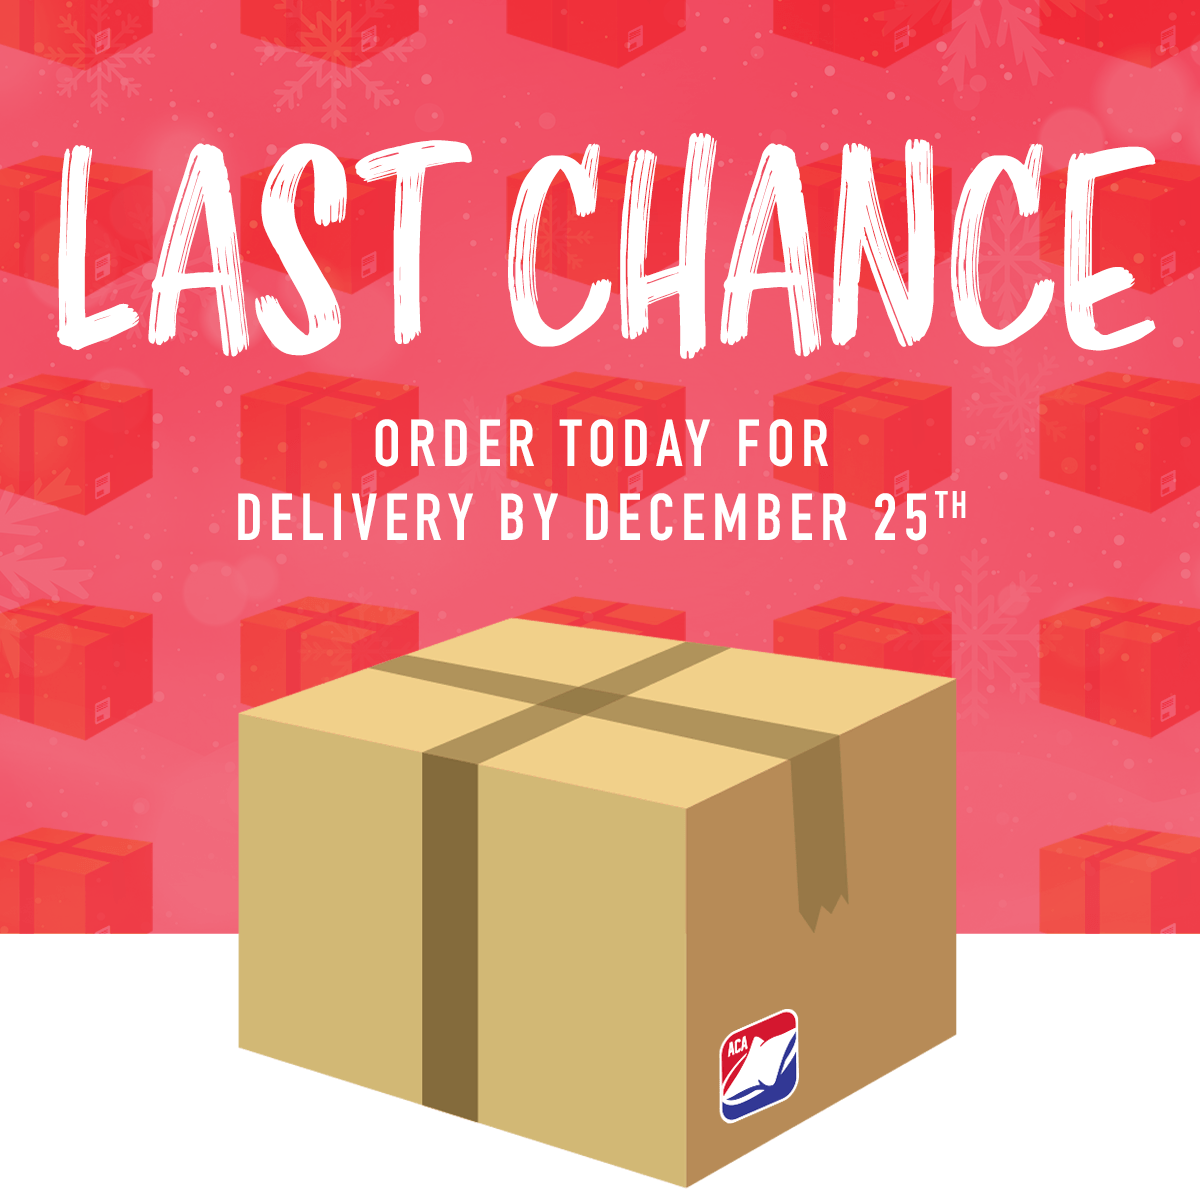 Last Chance for Delivery!